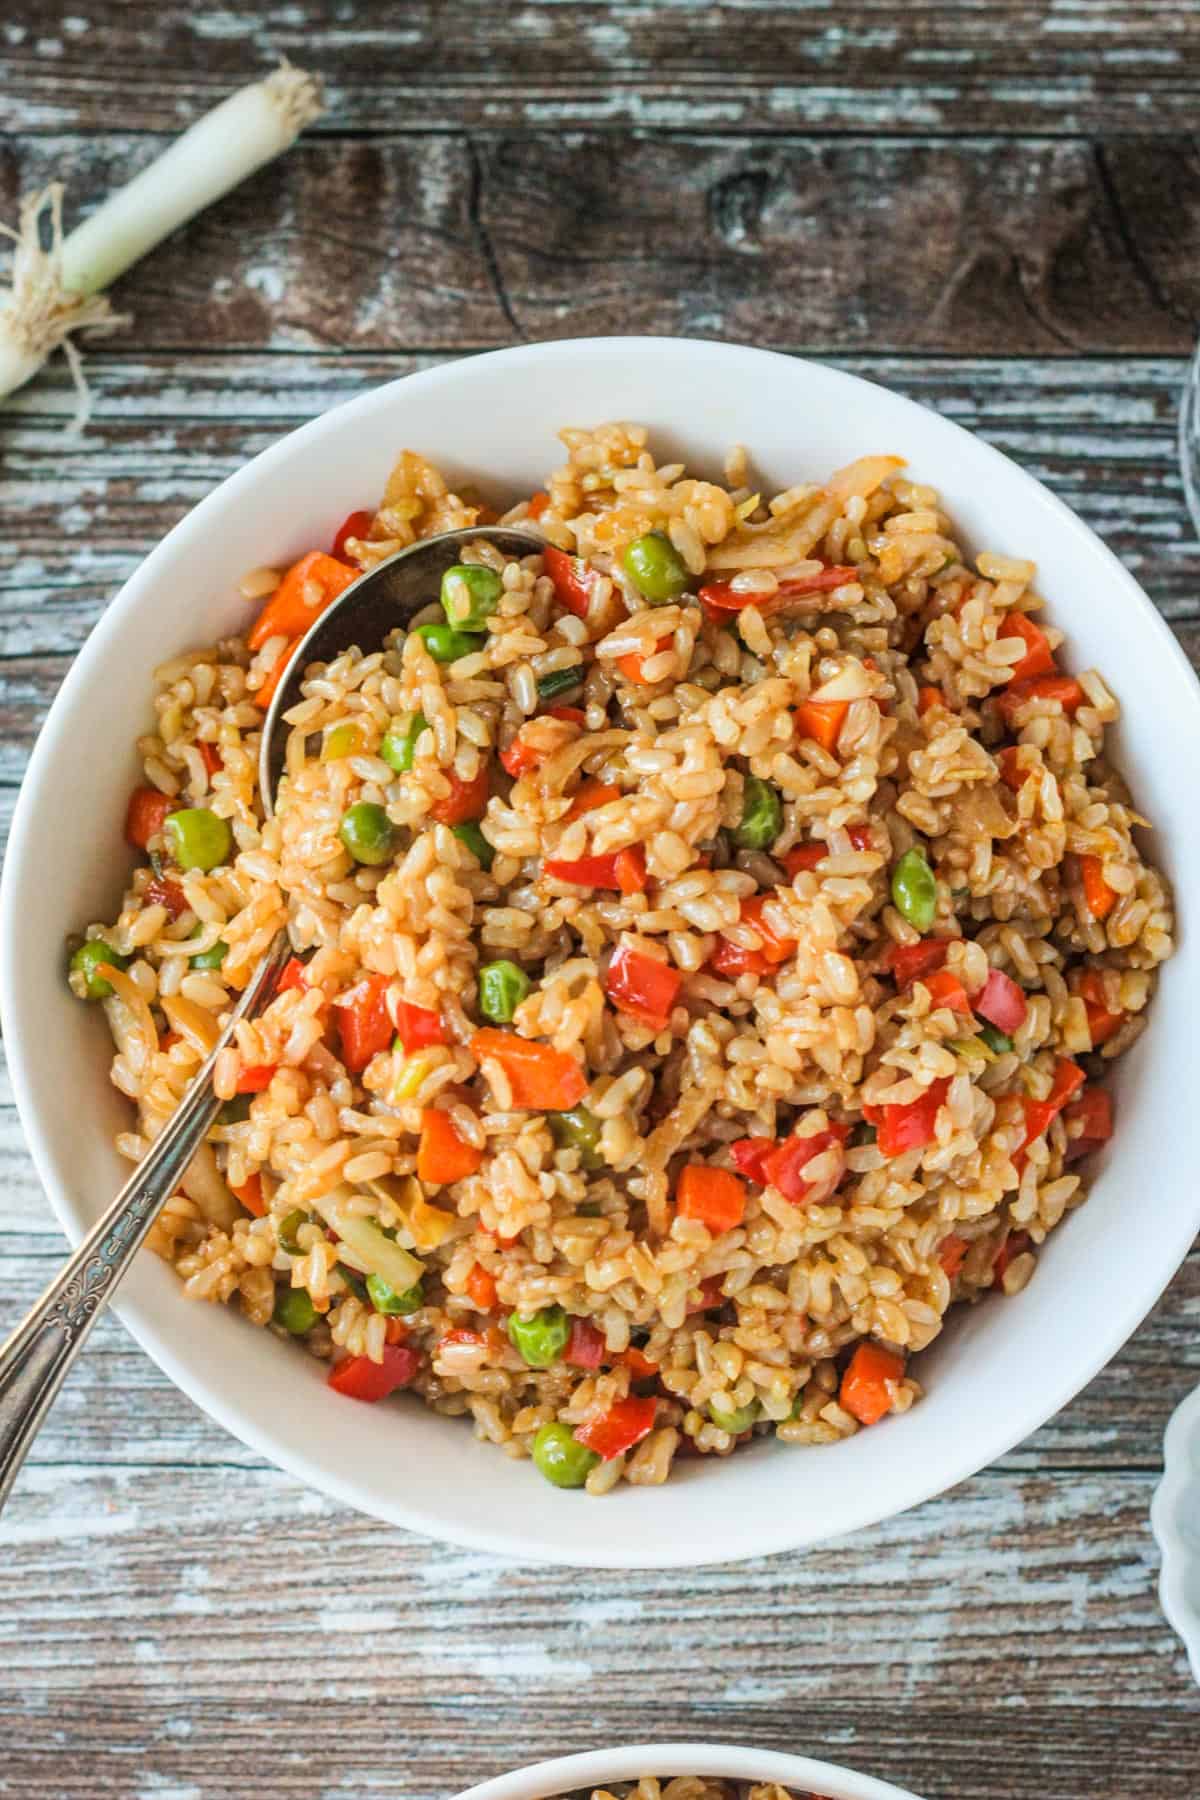 Metal spoon in a serving bowl of vegetable fried rice.